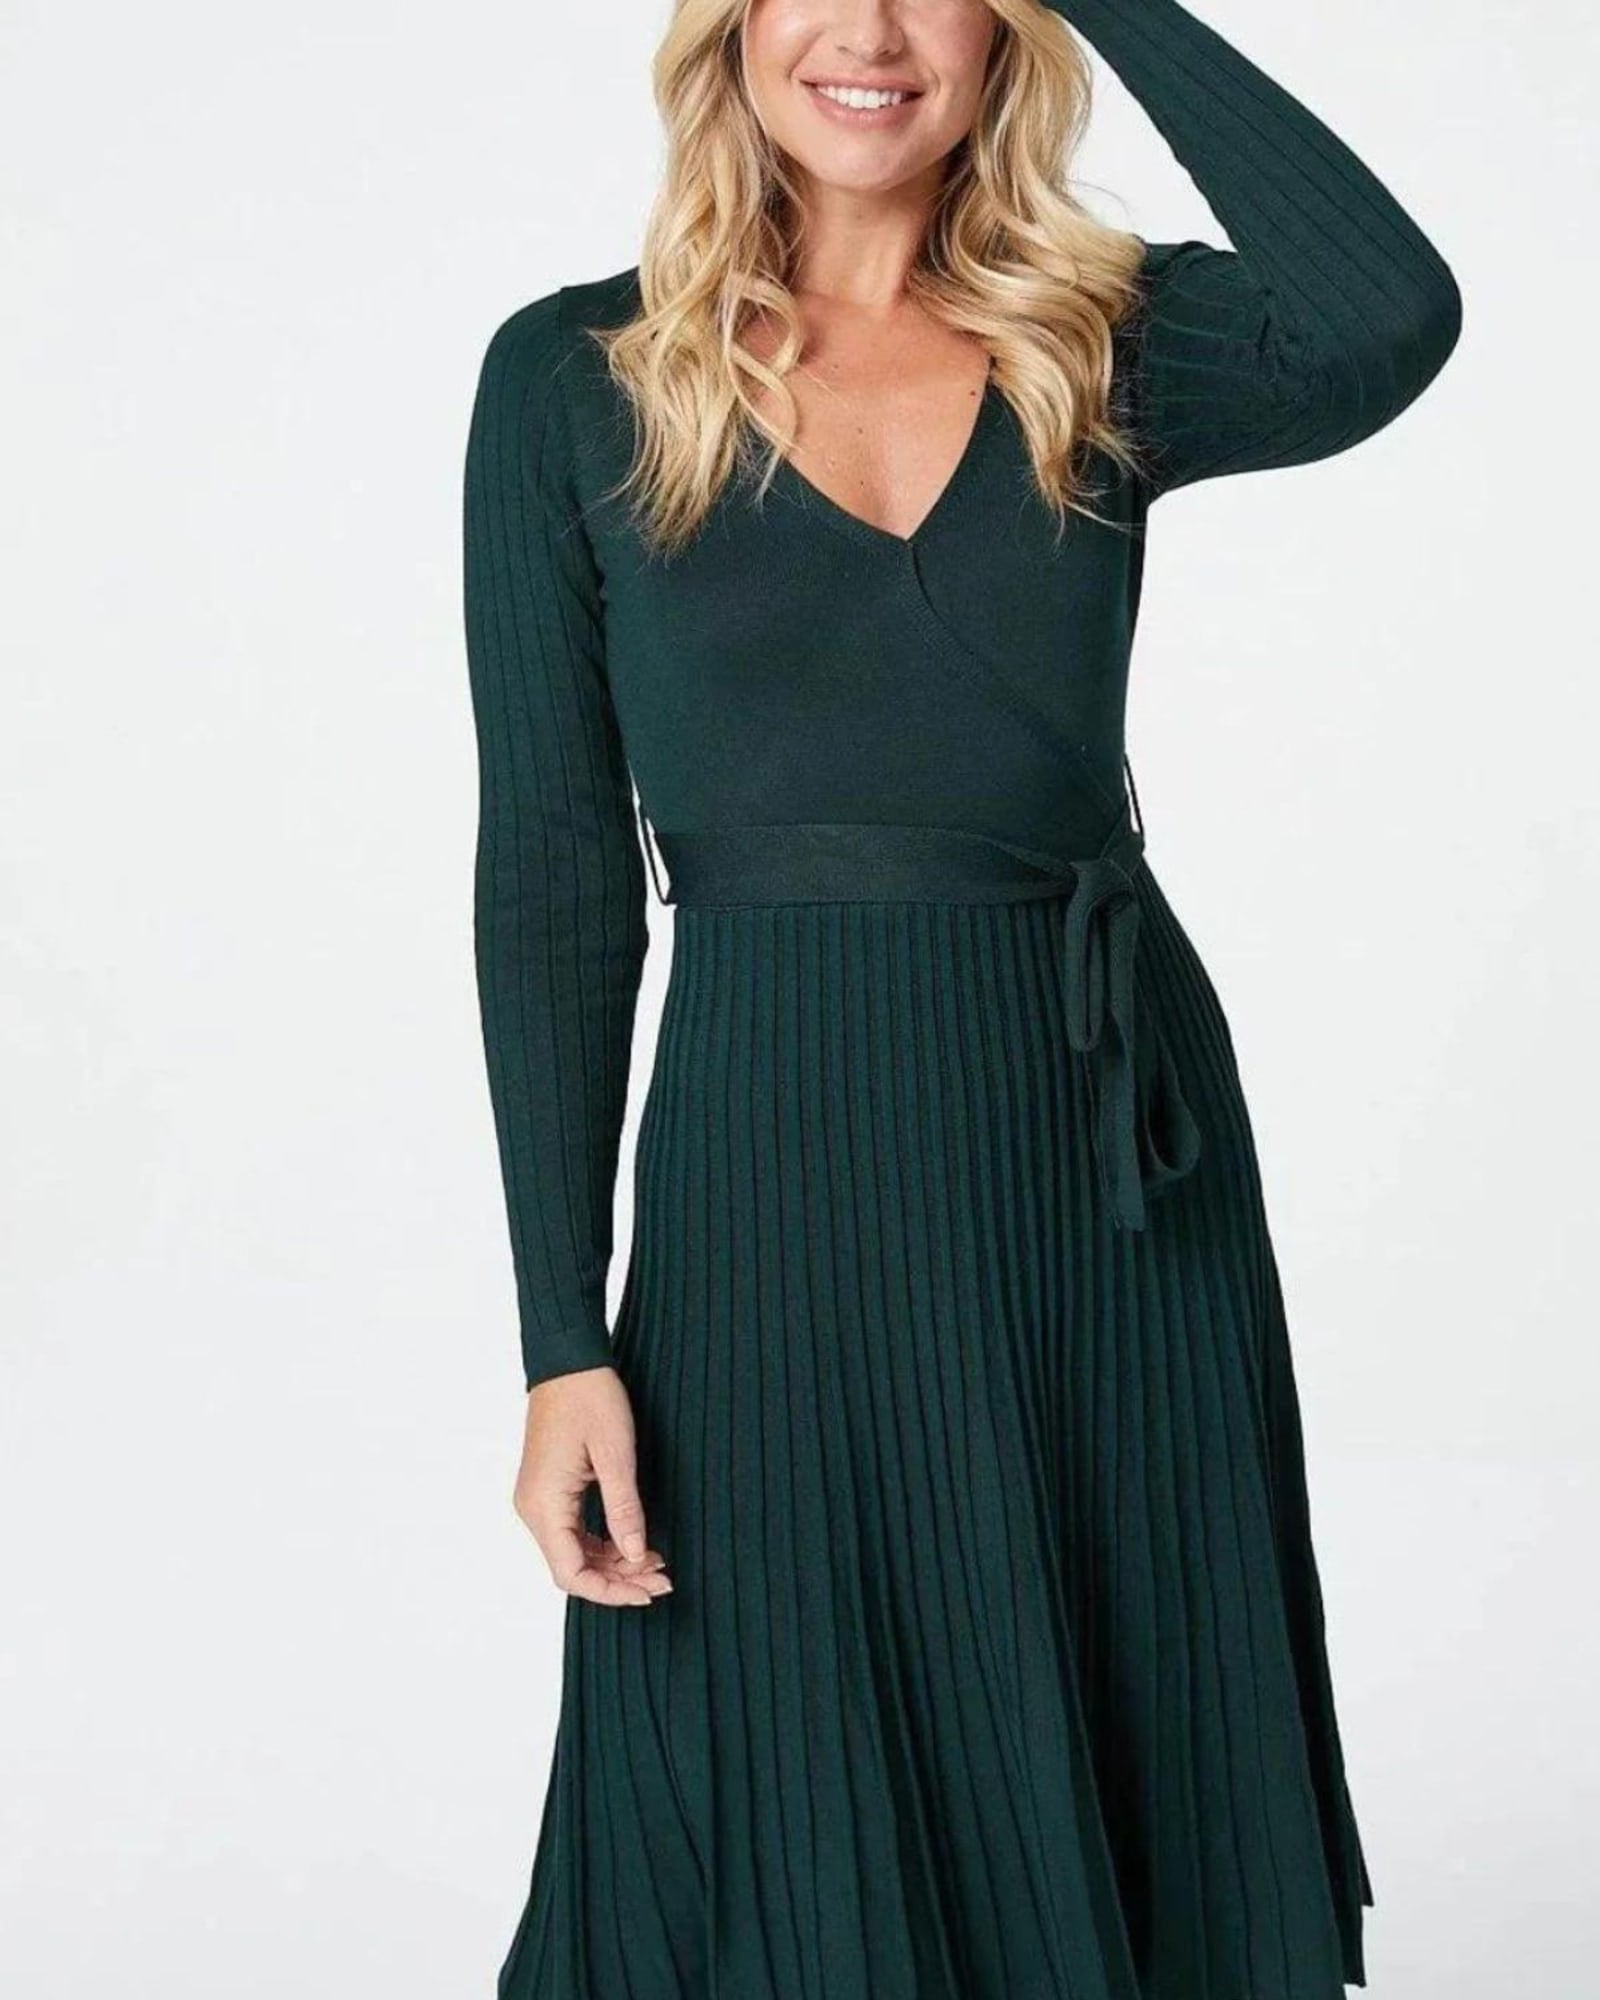 Adelina Dress Knit Pleated Skirt Crossover Top | Green